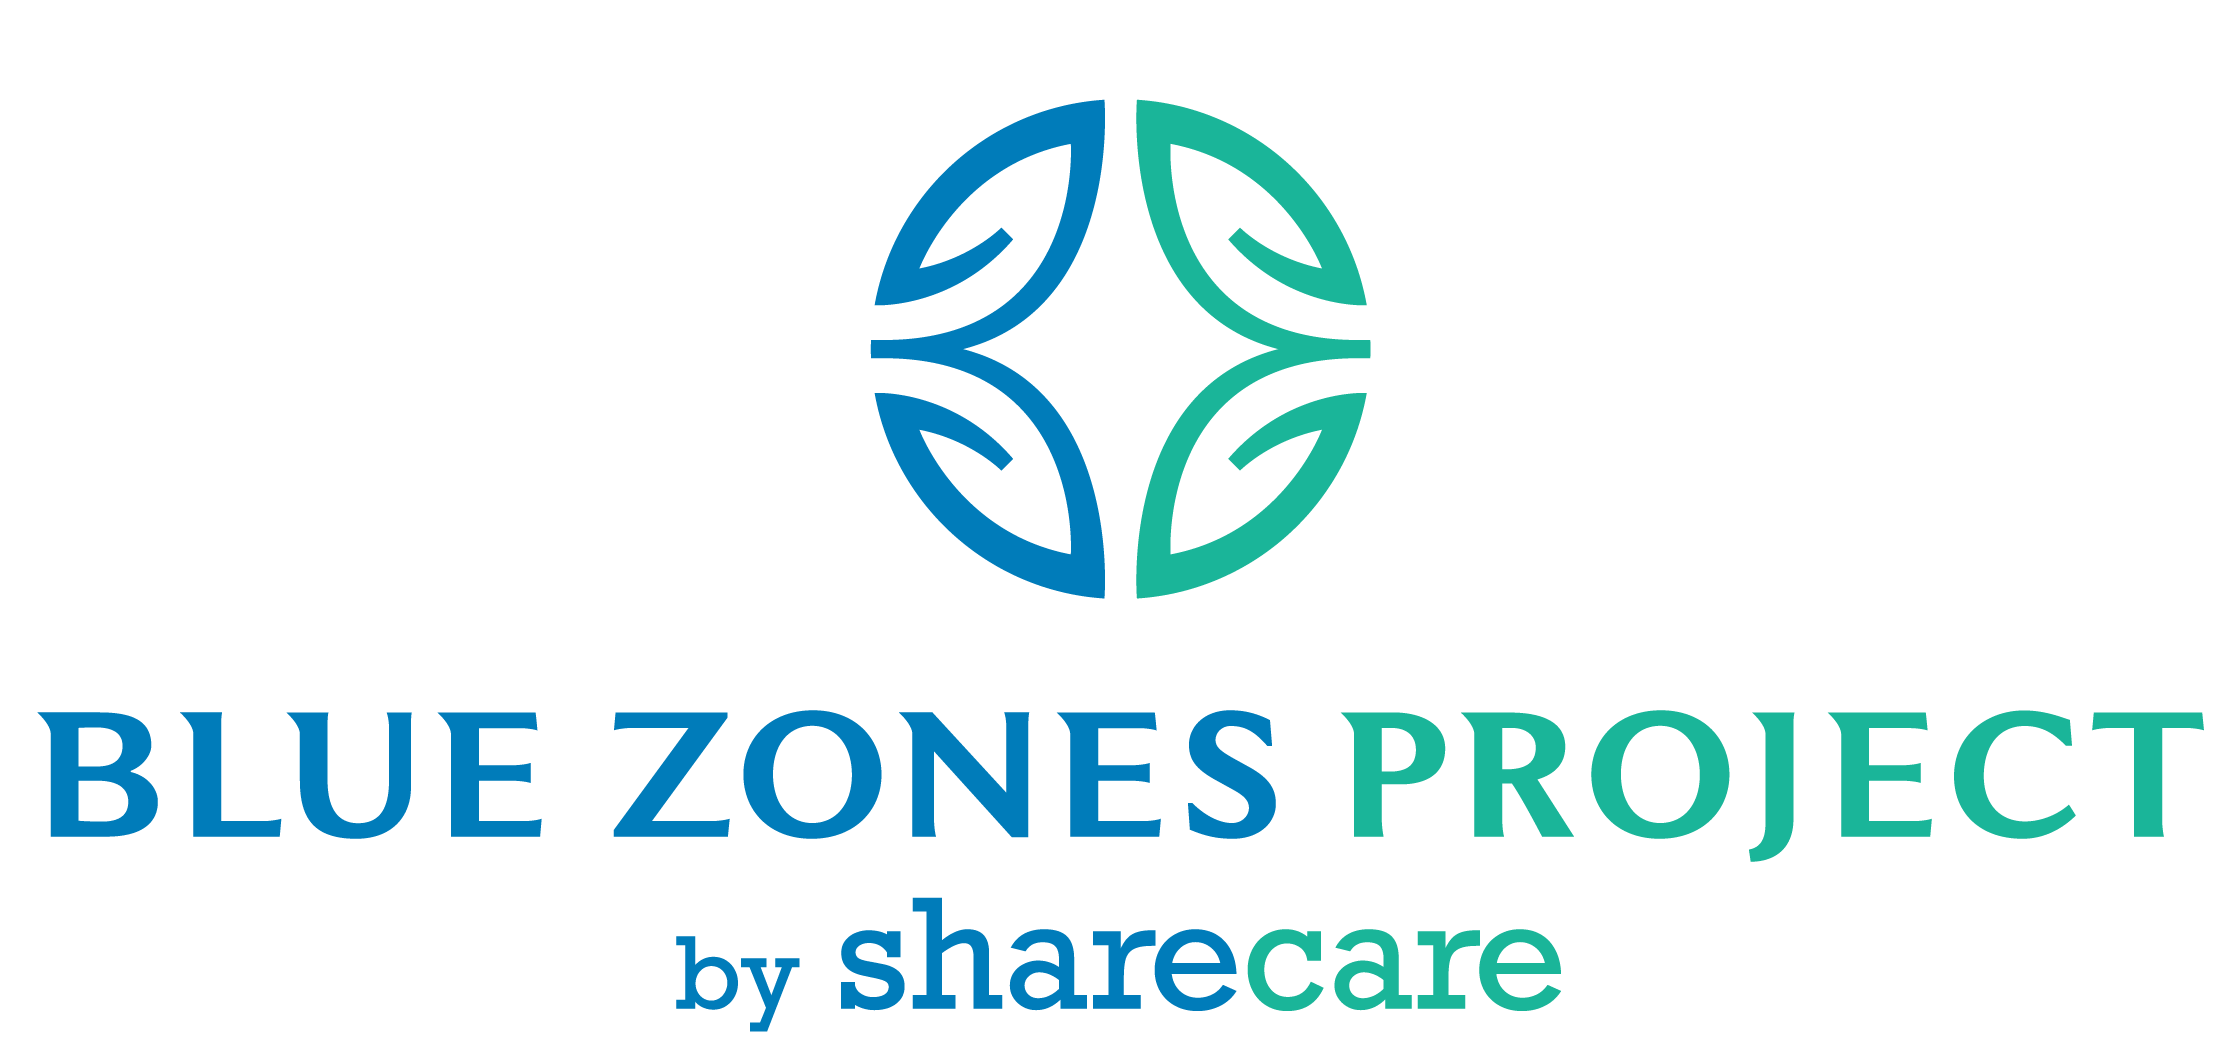 Blue Zones Project by Sharecare logo